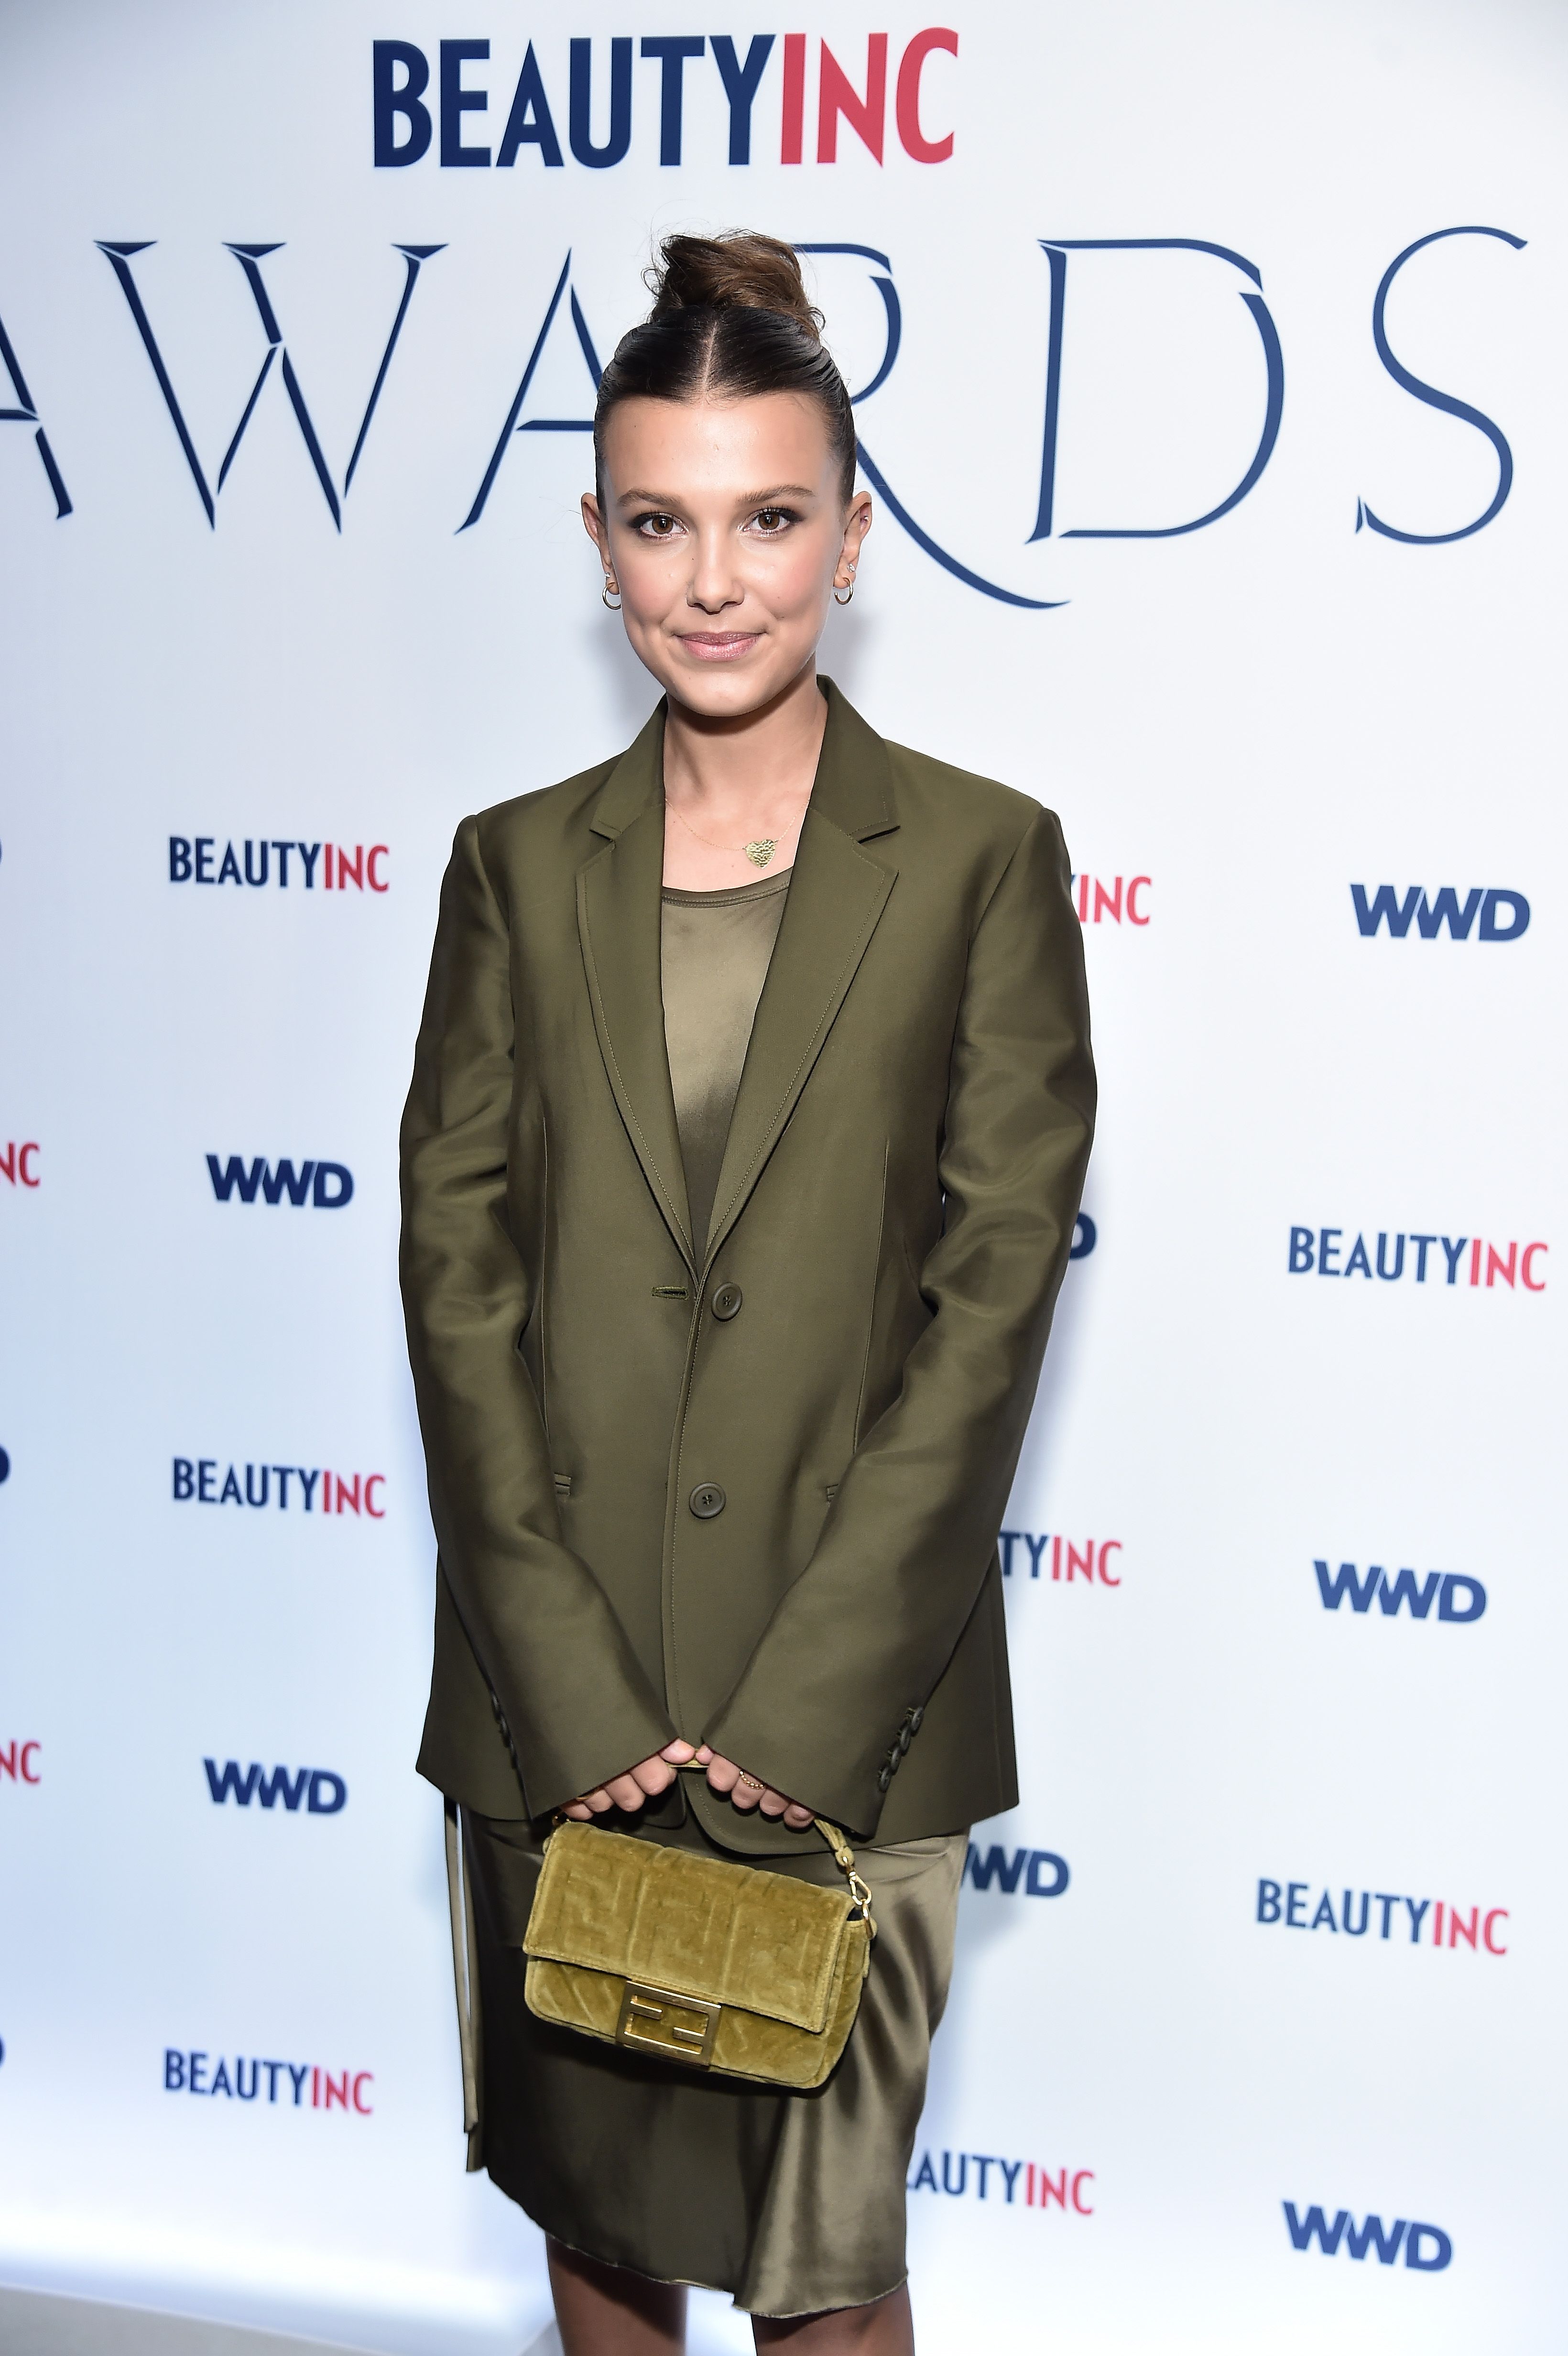 Millie Bobby Brown Wears Retro Plaid Outfit to Speak at the United Nations